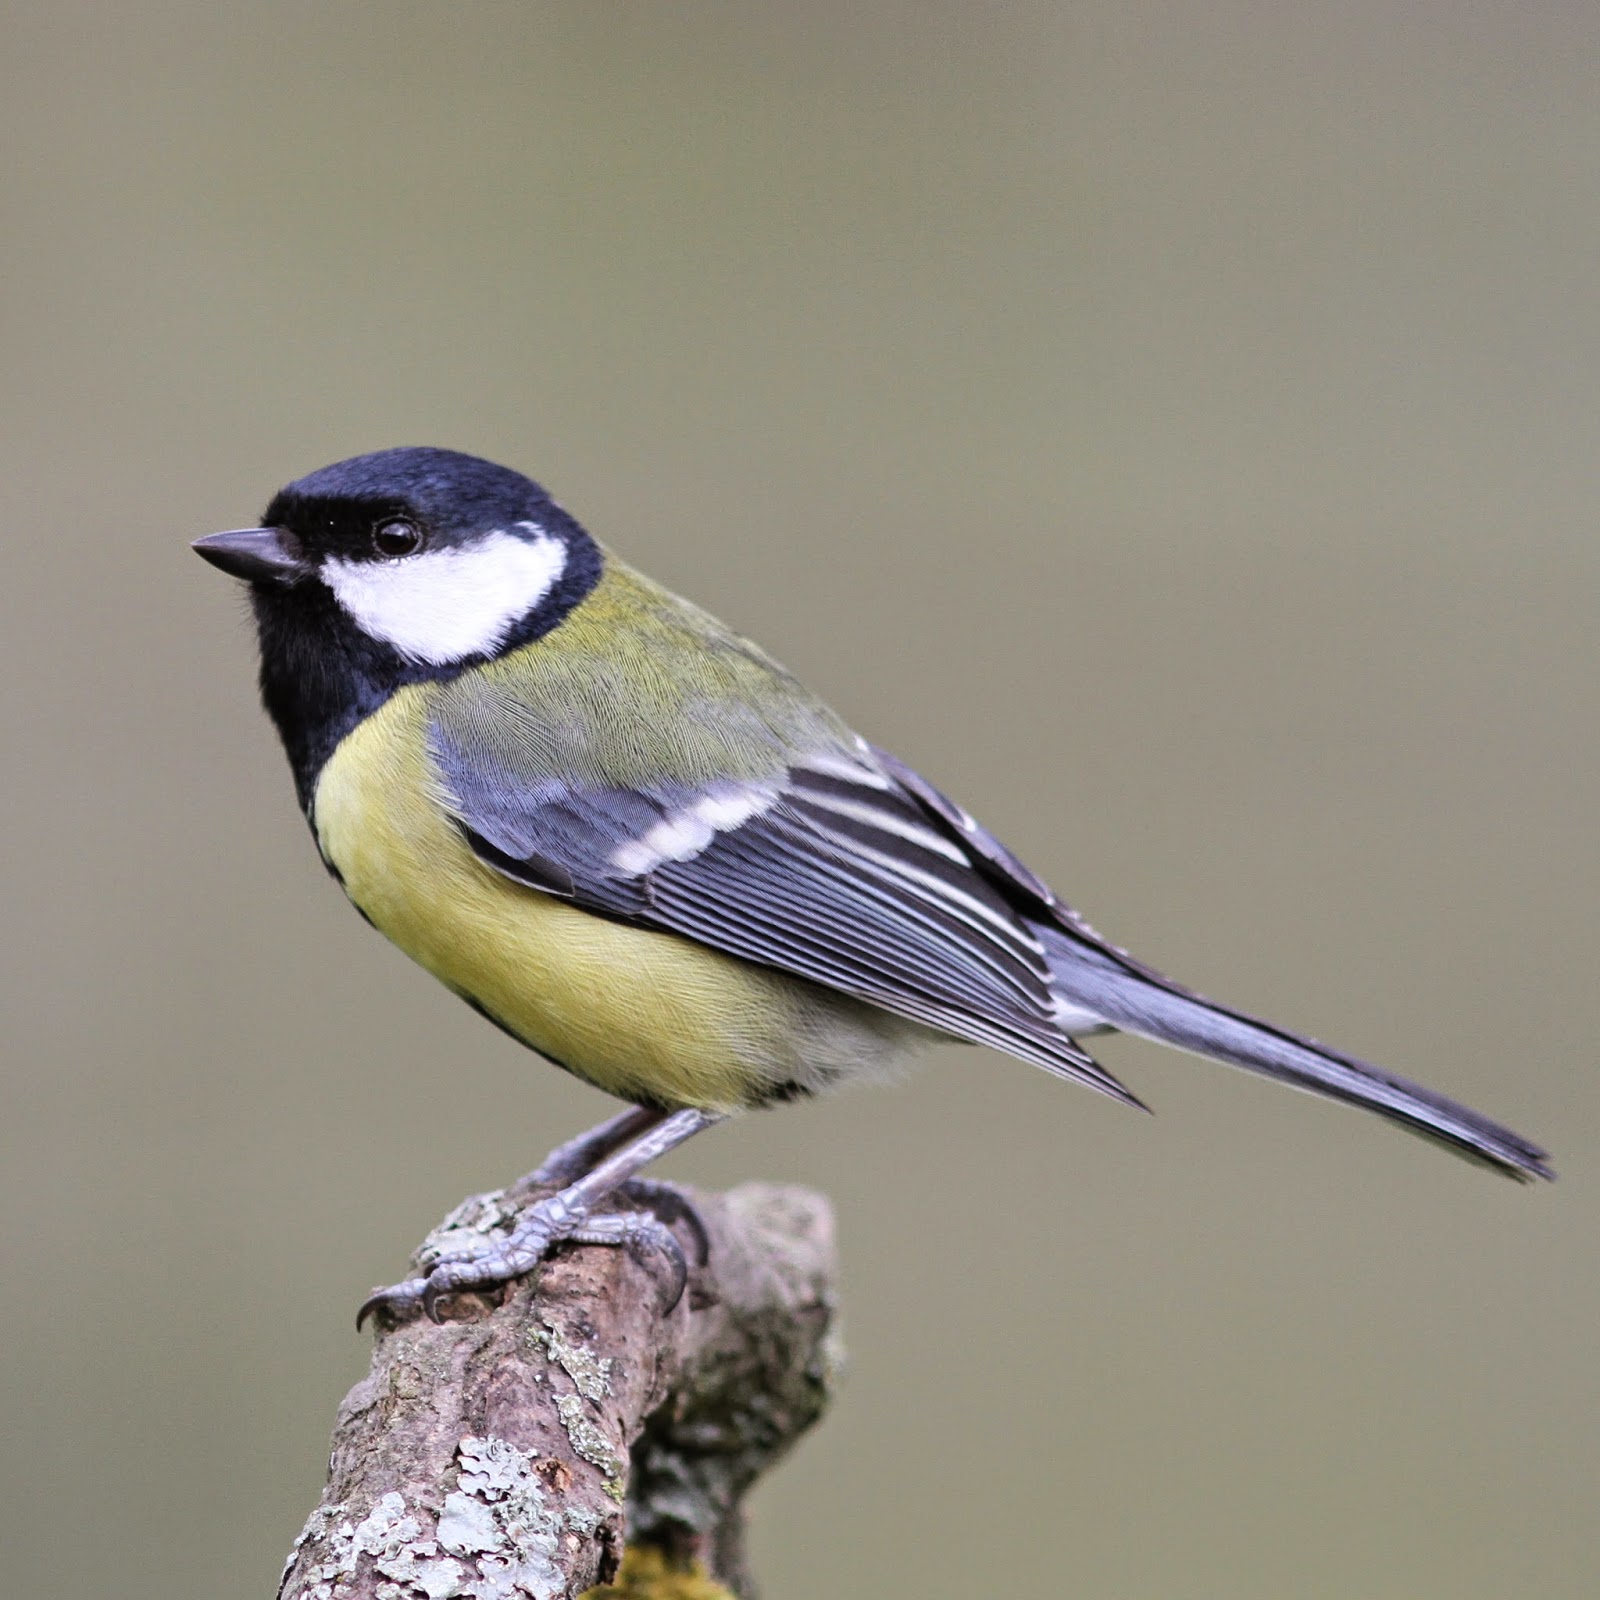 Bird of the week - Great tit.